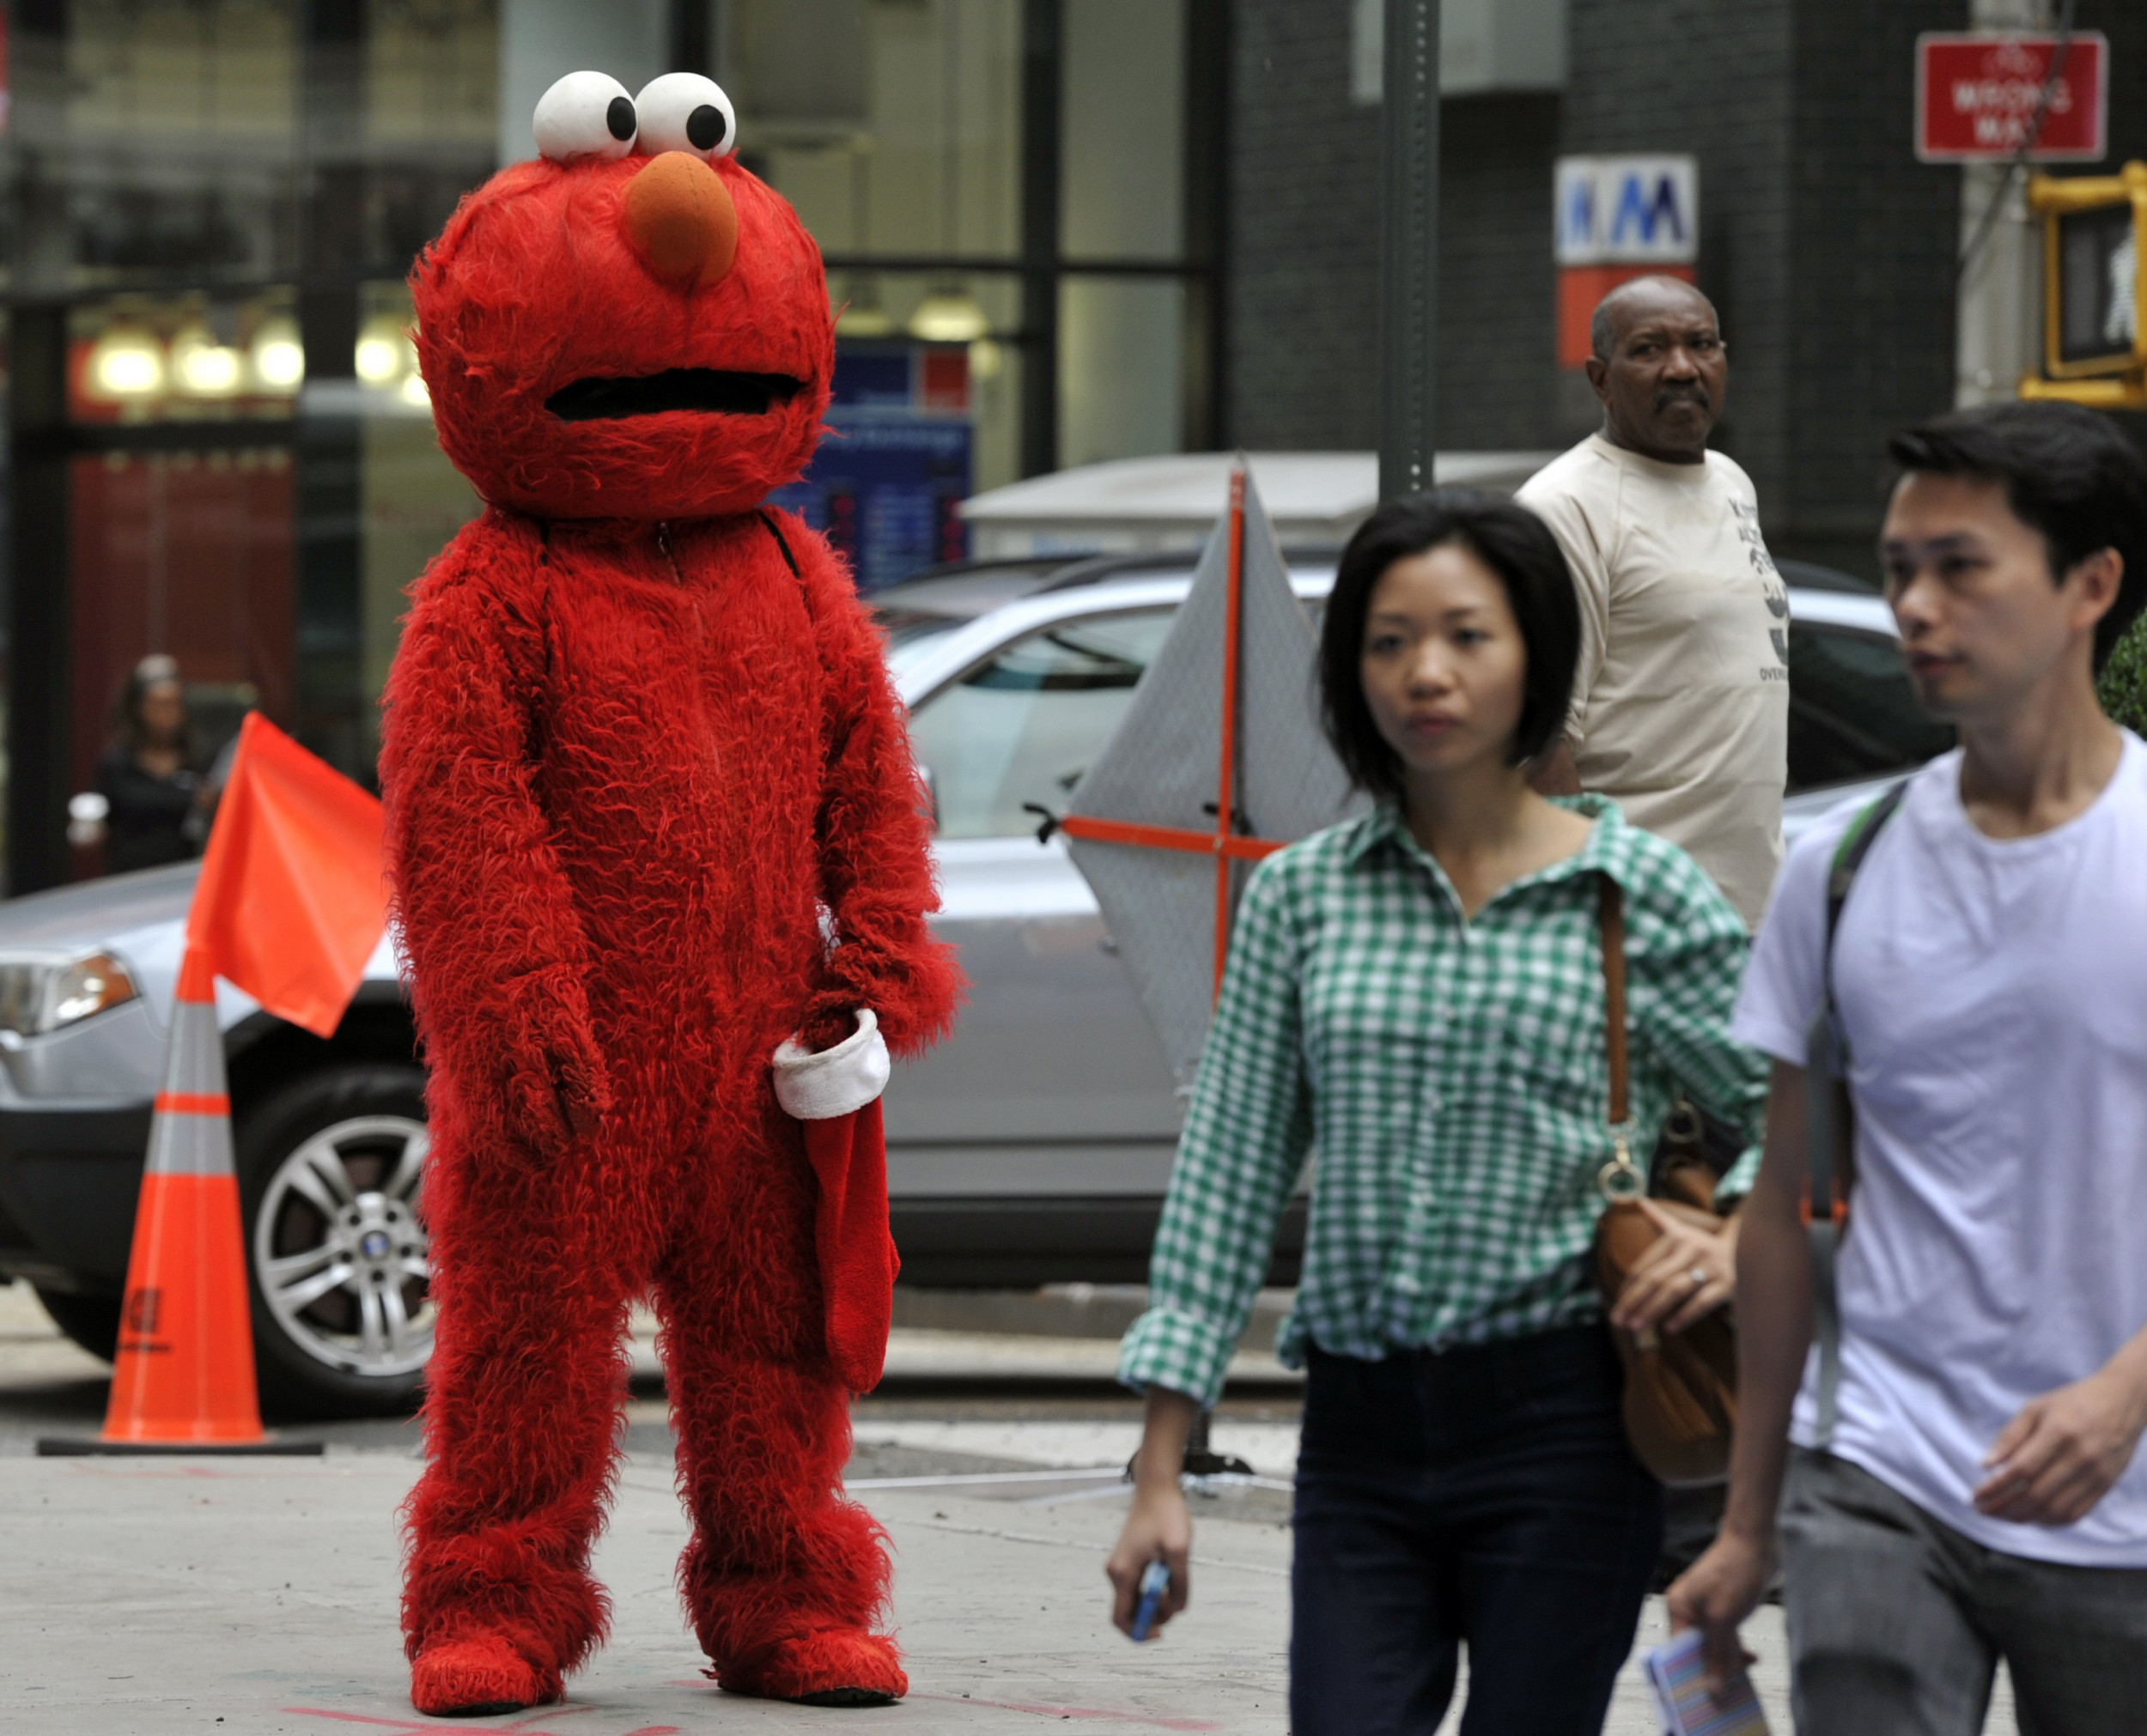 Man Dressed As Elmo Arrested For Allegedly Groping A 14 Year Old